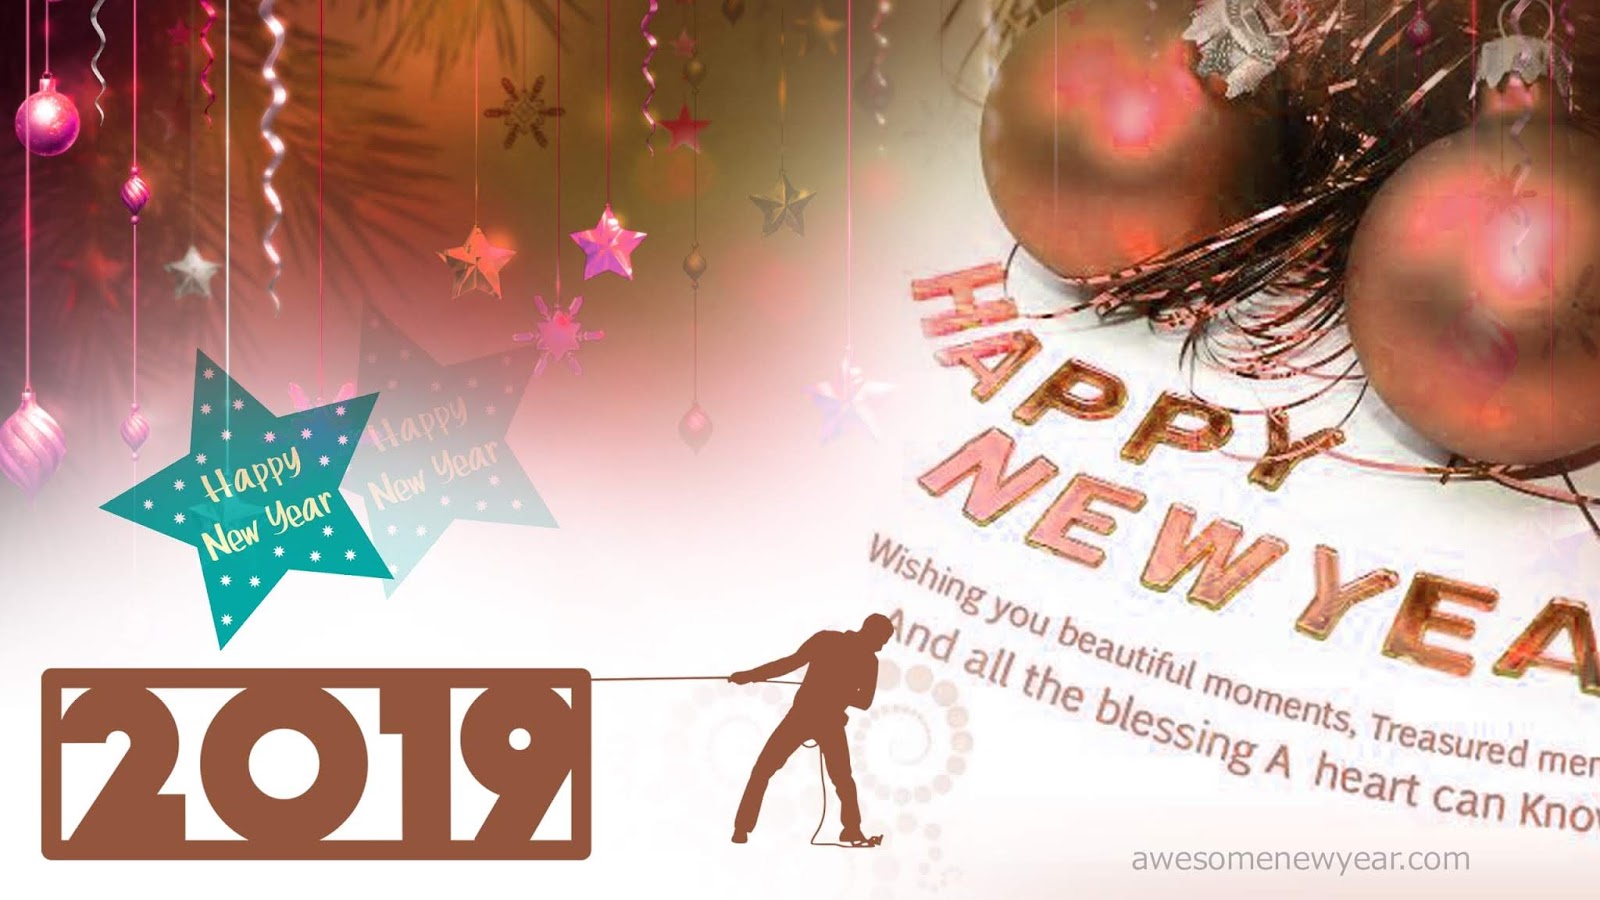  New Year 2019 Images hd